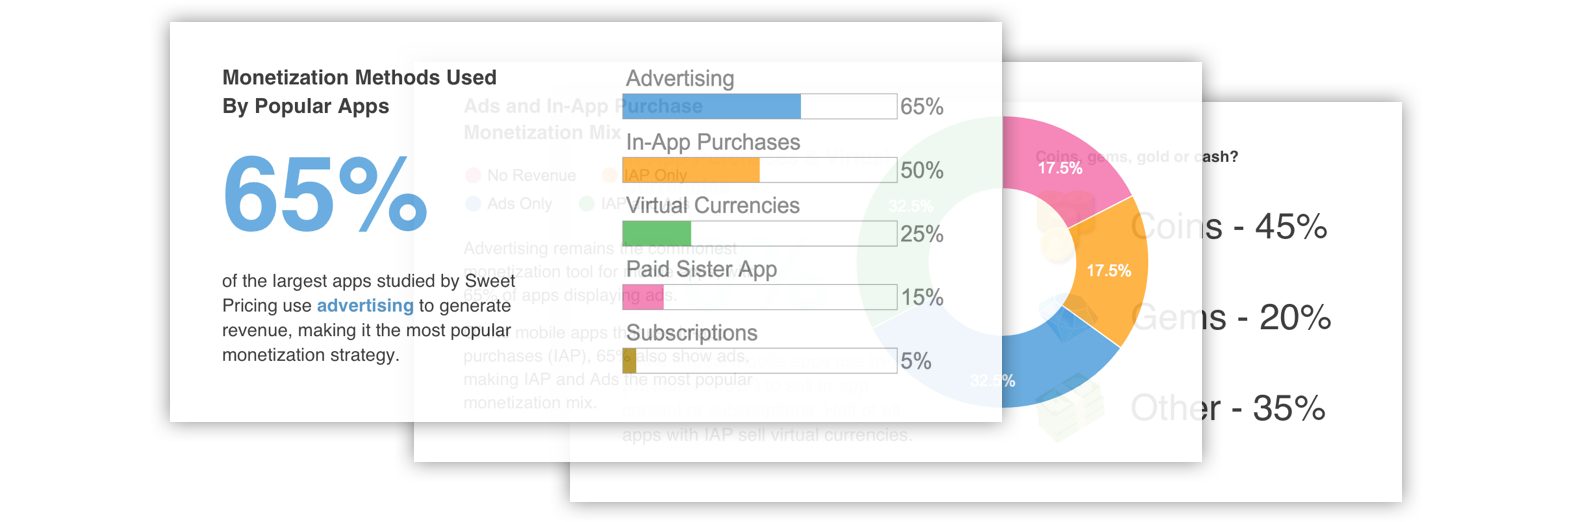 Sweet Pricing has studied 40 mobile apps to analyze the most common app monetization strategies.